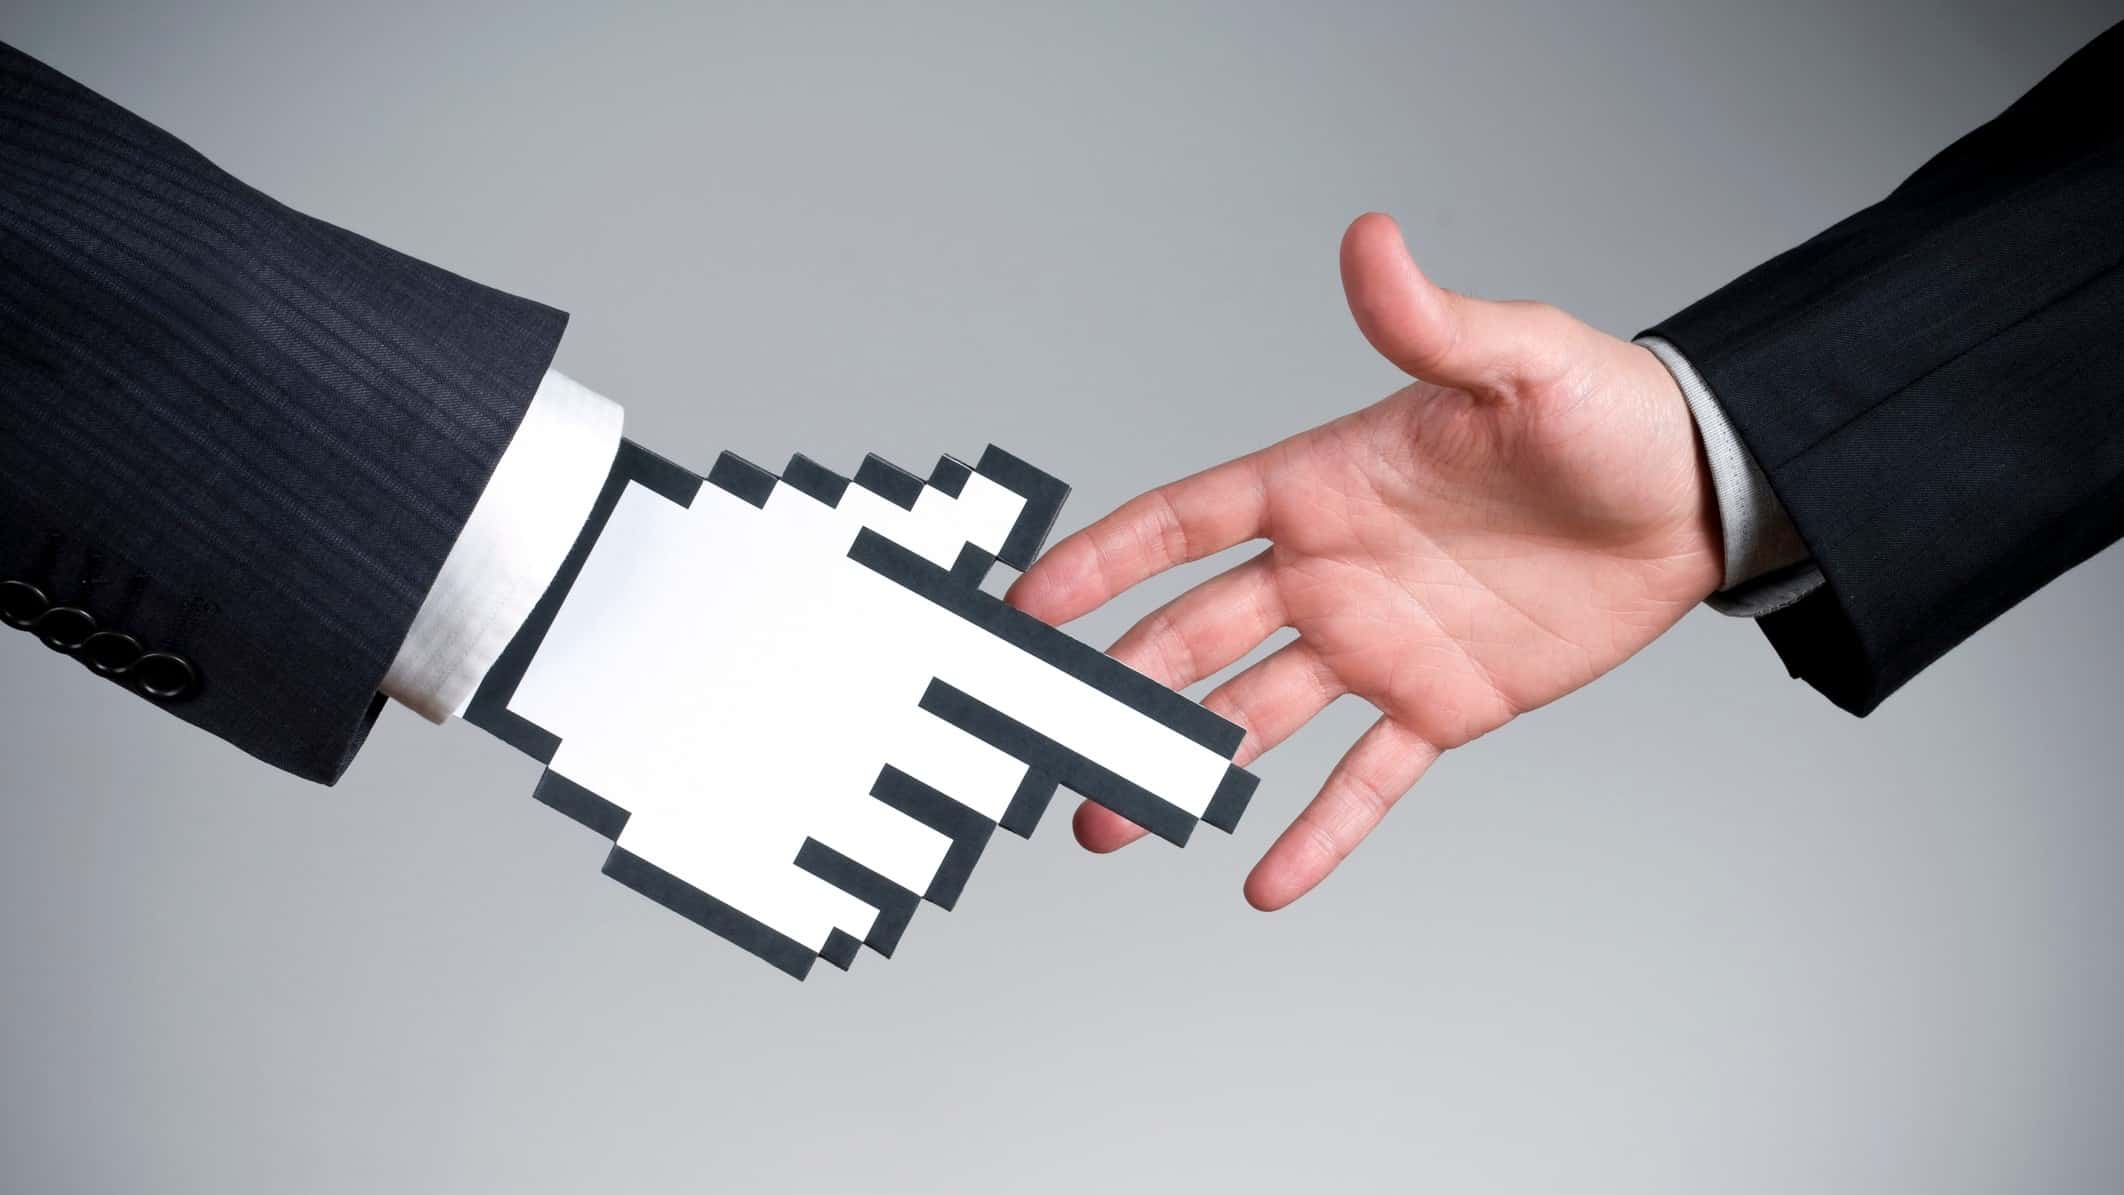 rising asx share price following takeover represented by two people shaking hands